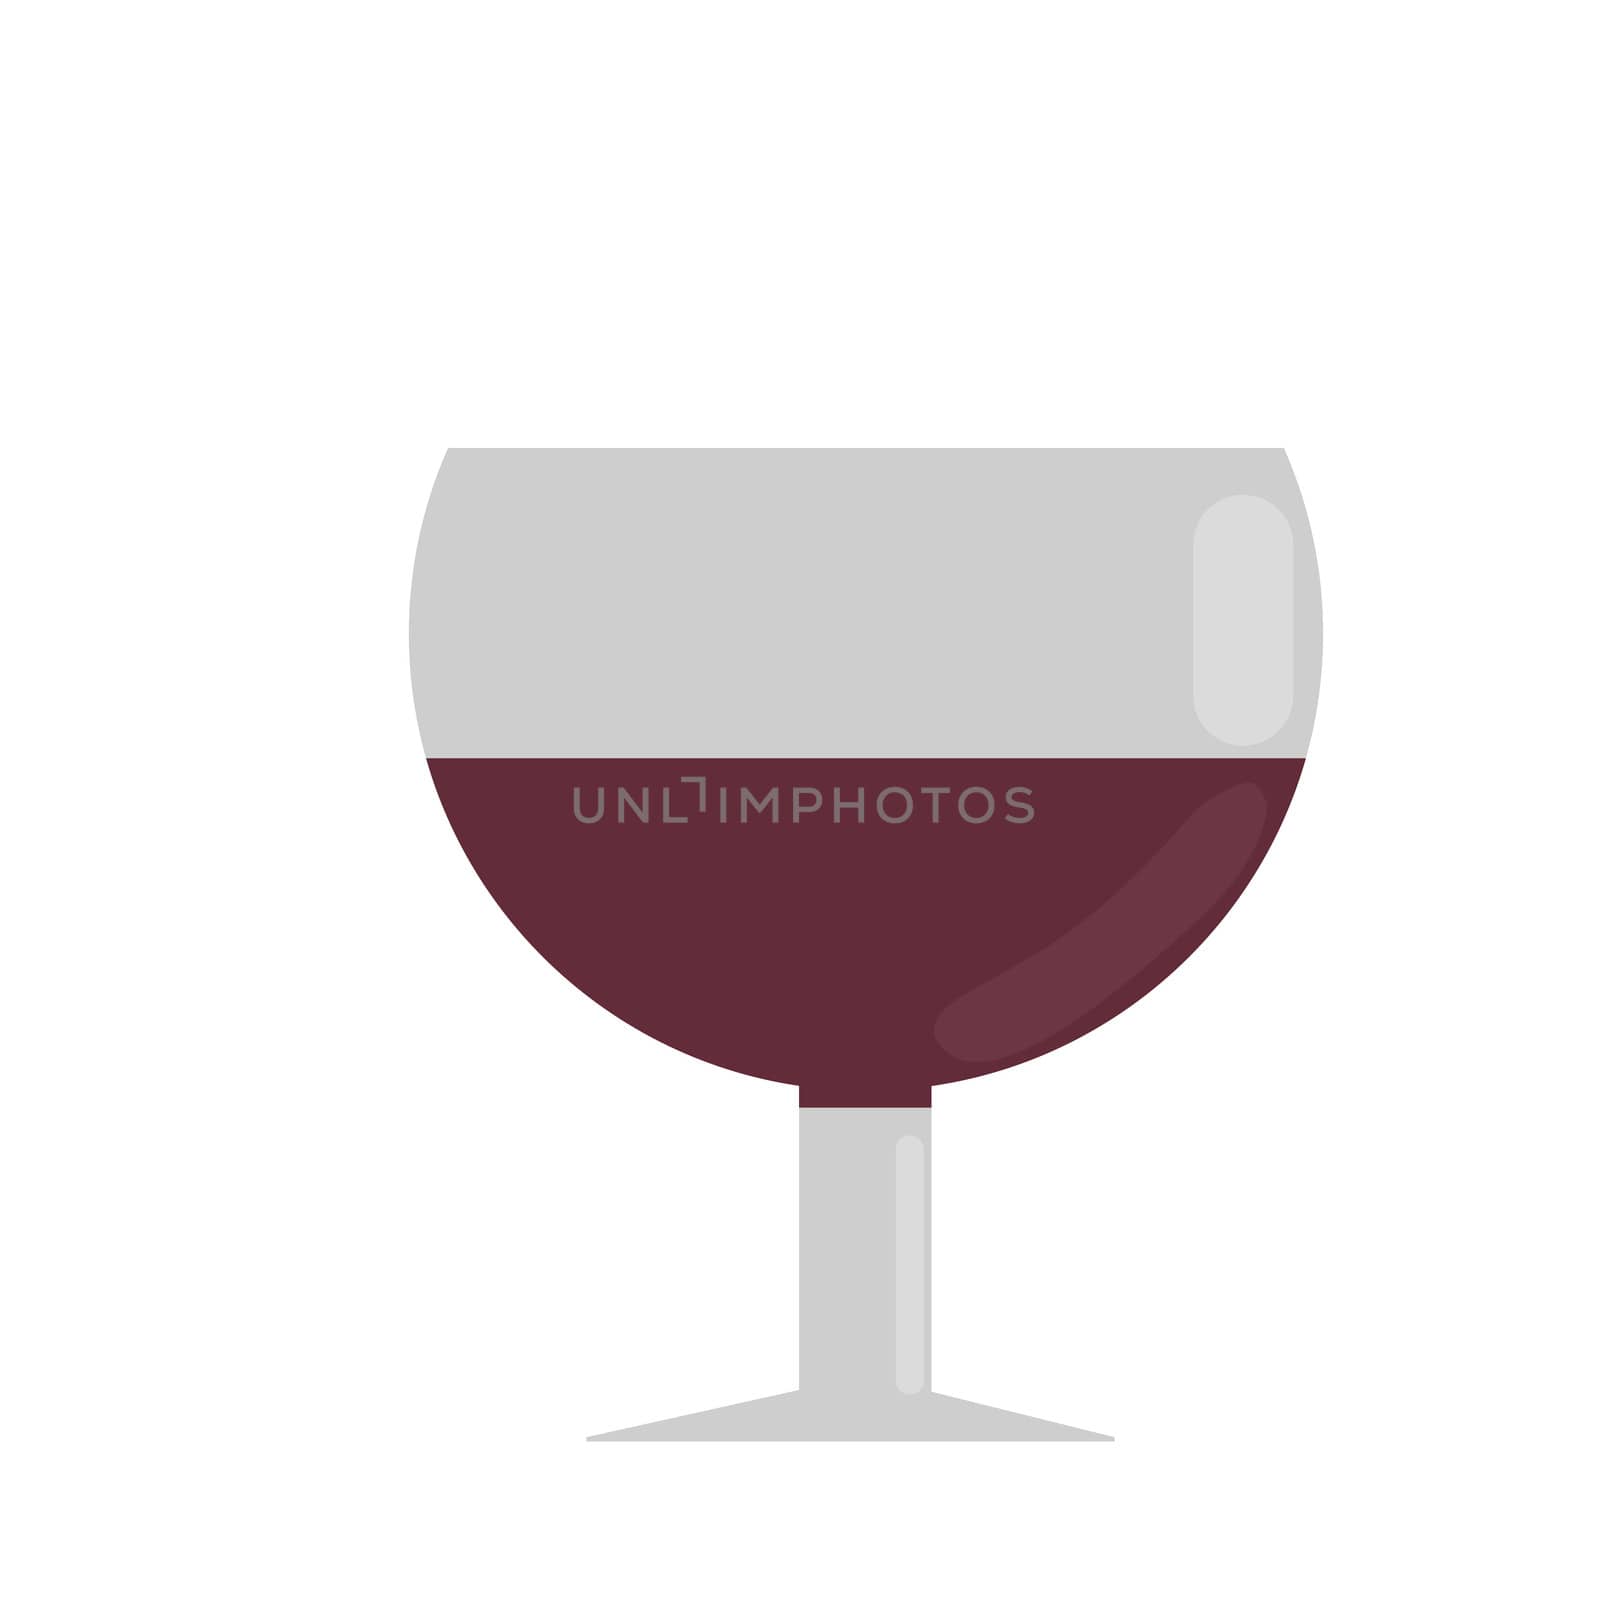 a glass of red wine. illustration in flat style by zaryov